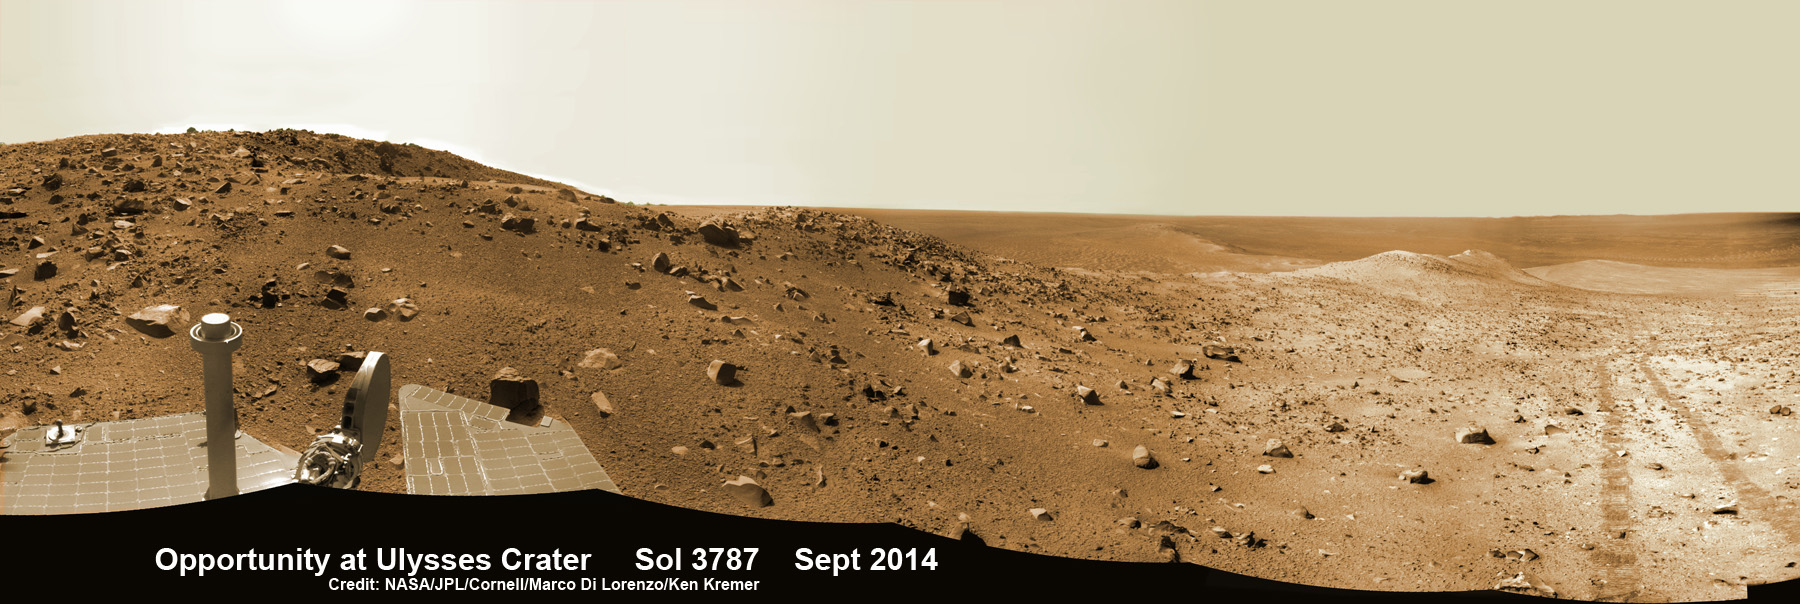 NASA’s Opportunity Mars rover peers out towards Ulysses crater, ejecta rocks and Martian plains beyond  from her Endeavour crater rim location on Sept. 18, 2014.   Notice dramatic wheel tracks (right) as rover ascends steep crater slopes. This navcam camera photo mosaic was assembled from images taken on Sol 3787, Sept. 18, 2014 and colorized.  Credit: NASA/JPL/Cornell/Marco Di Lorenzo/Ken Kremer - kenkremer.com